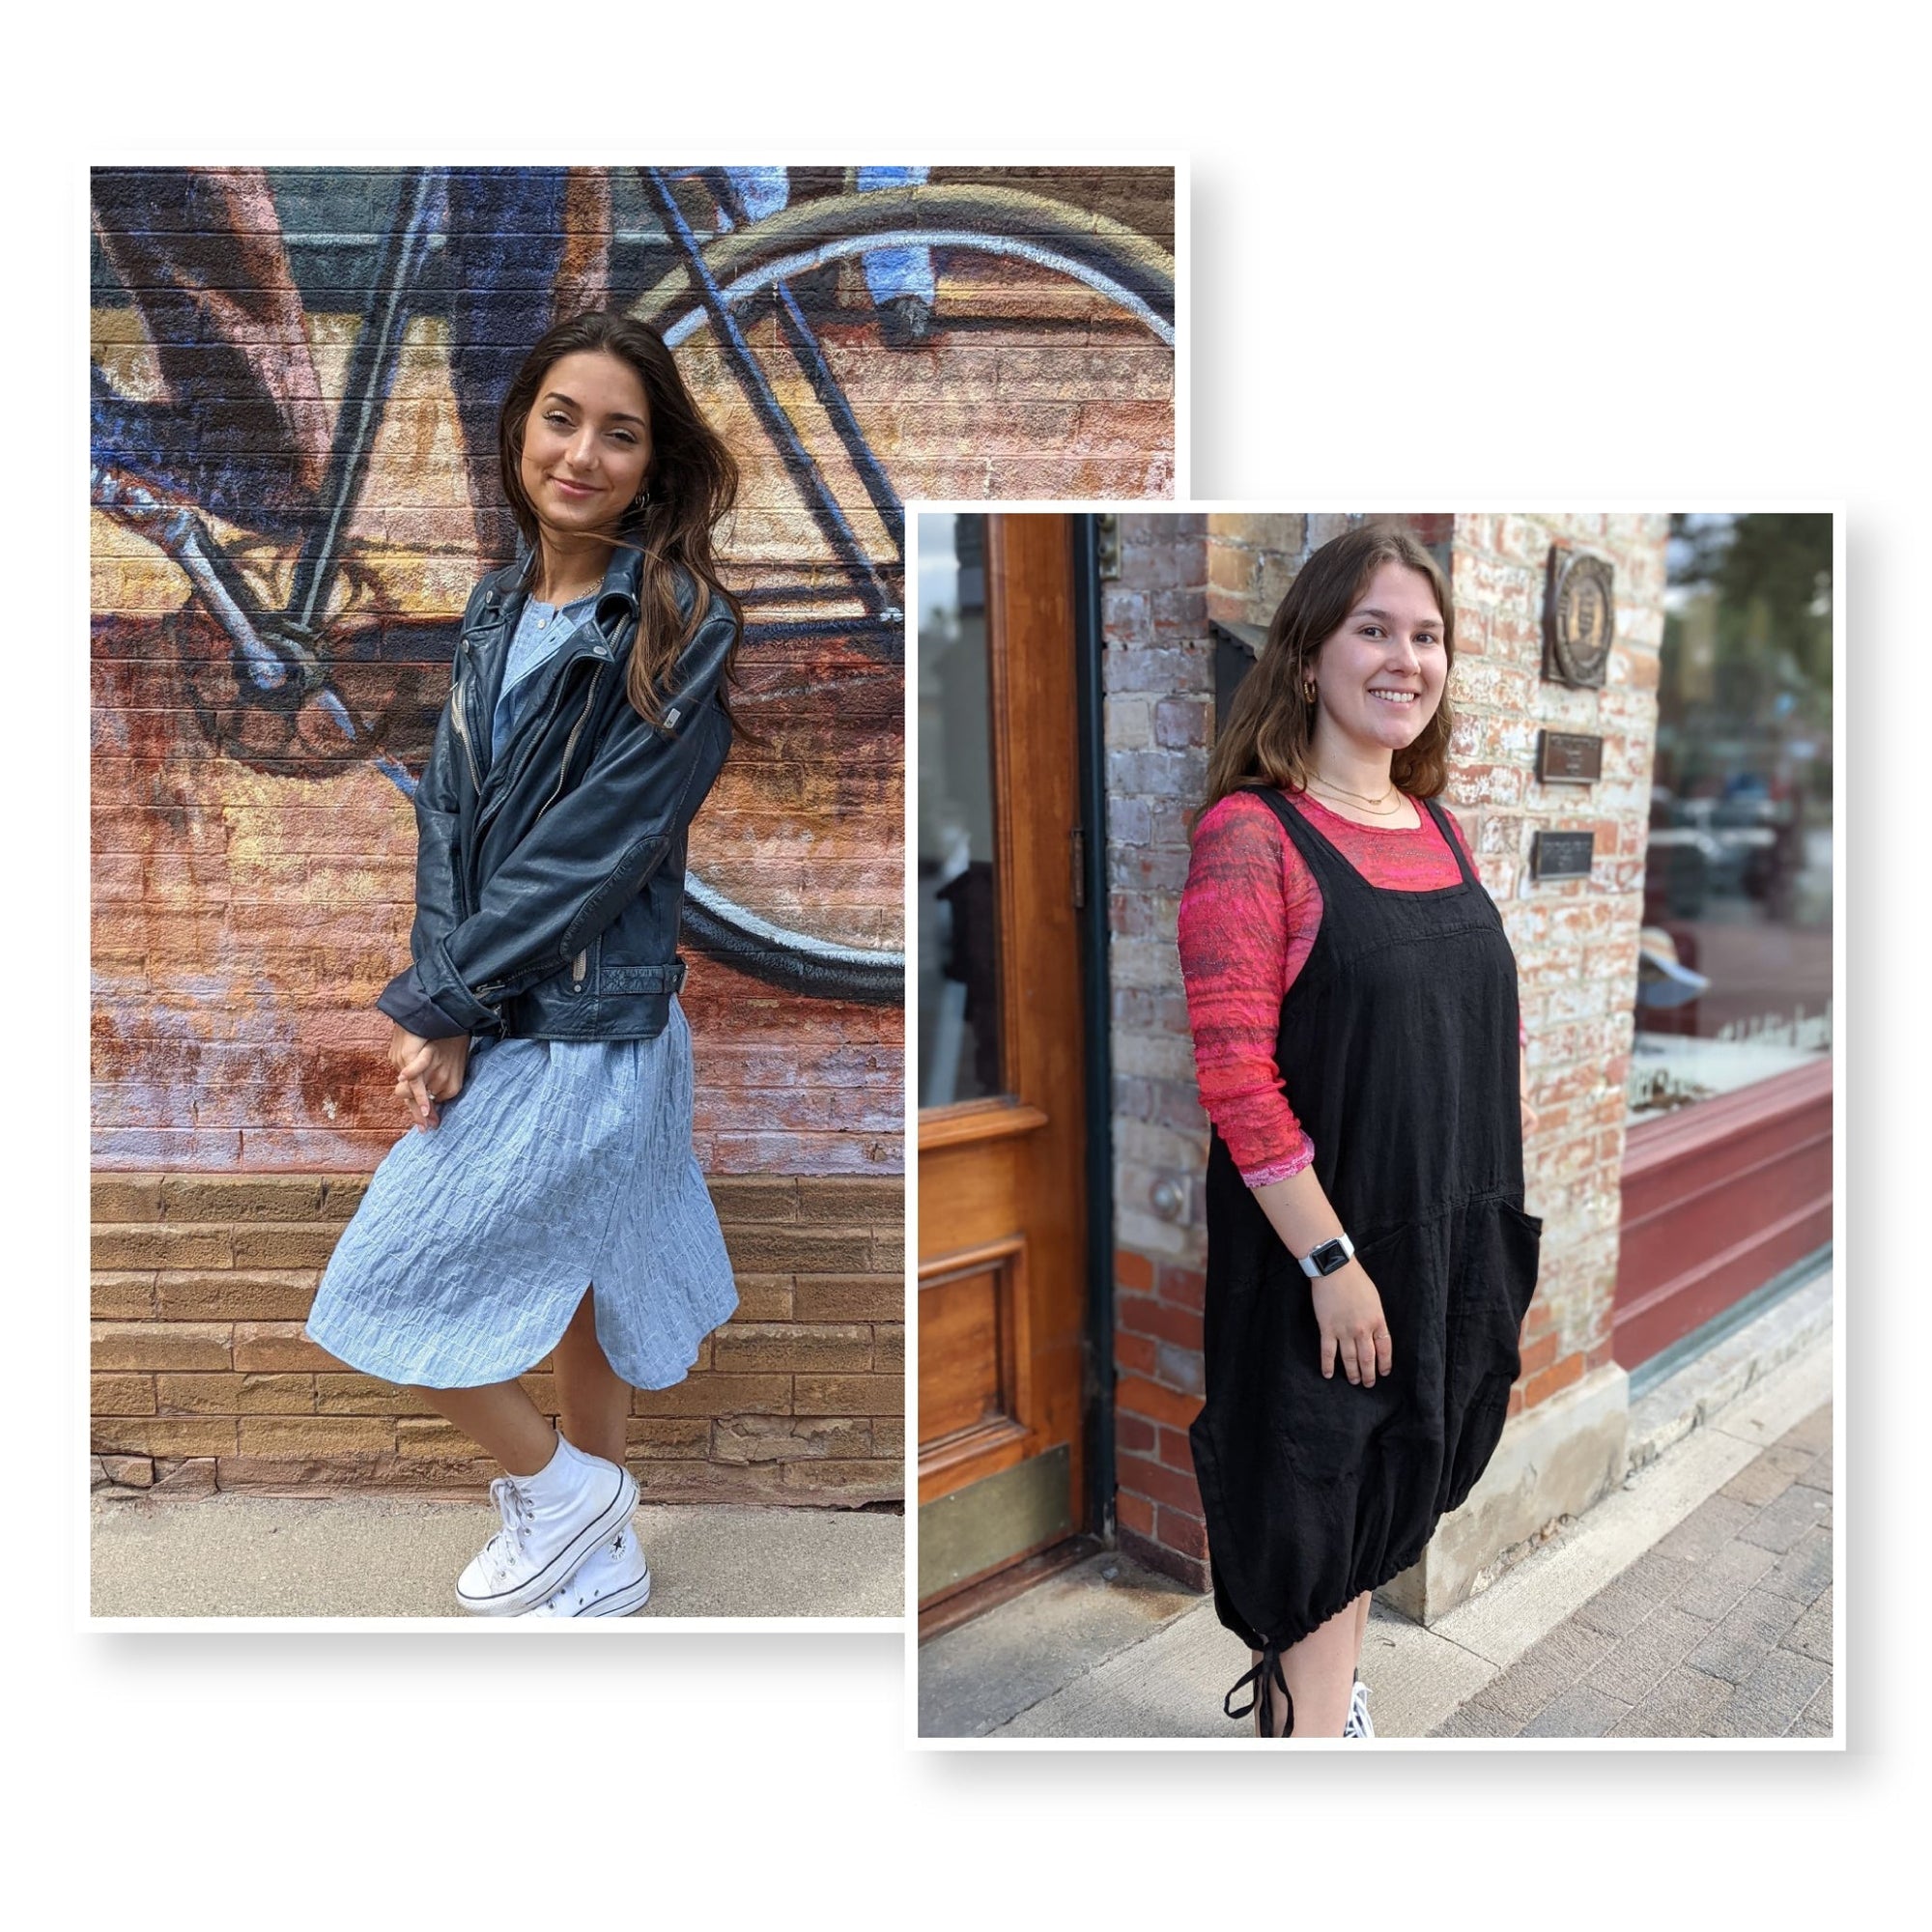 Introducing our latest two Superstar Stylists!